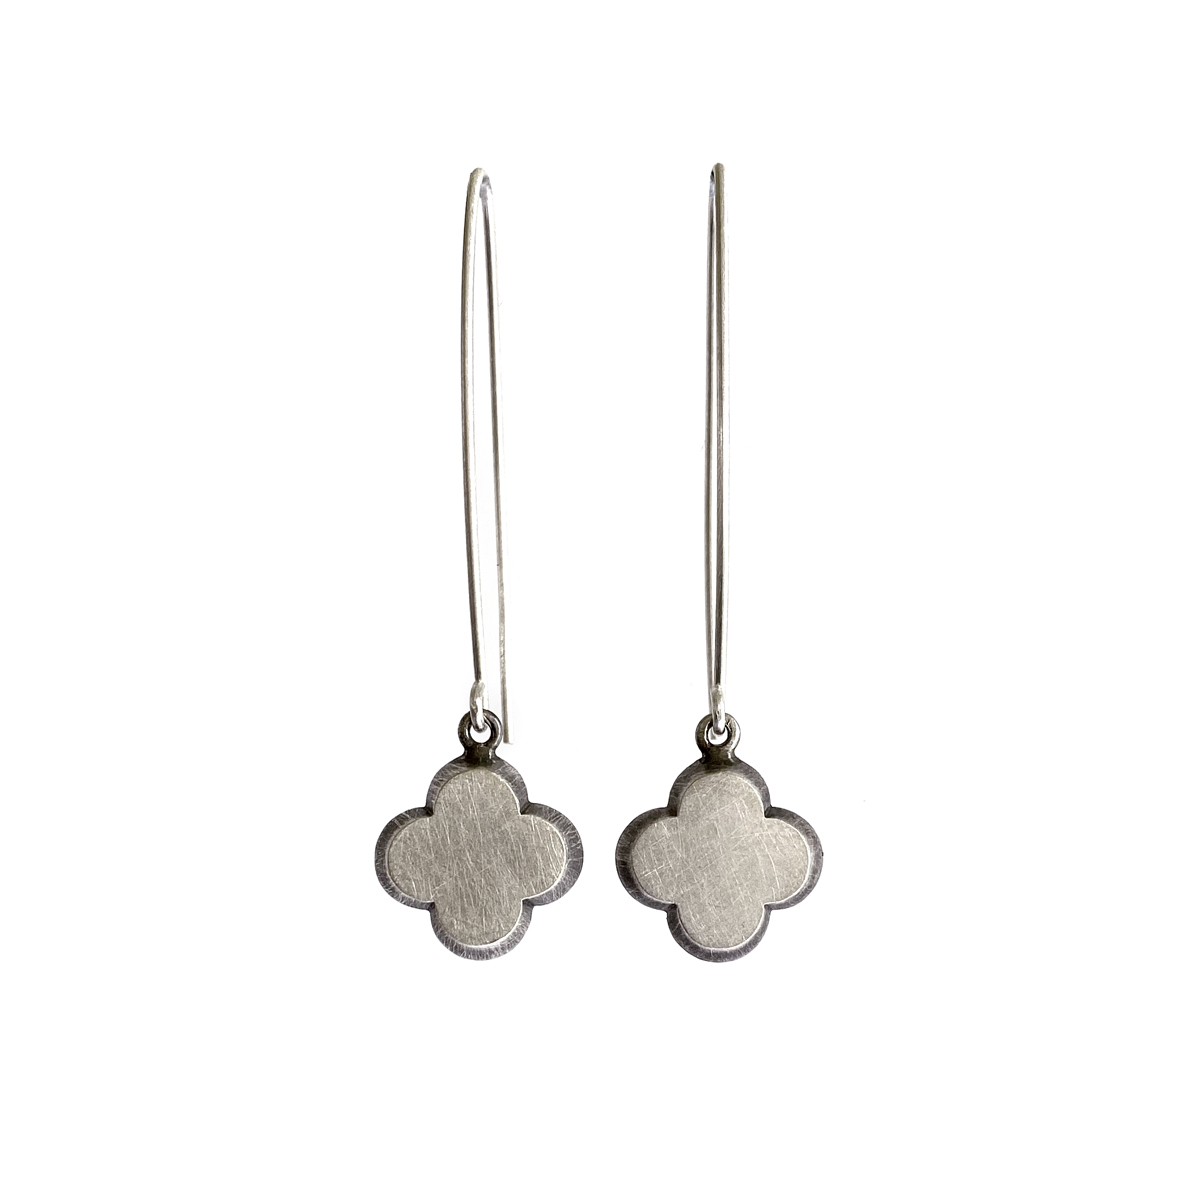 Reverence Earrings (long drop) , silver, 2020, Kate Alterio